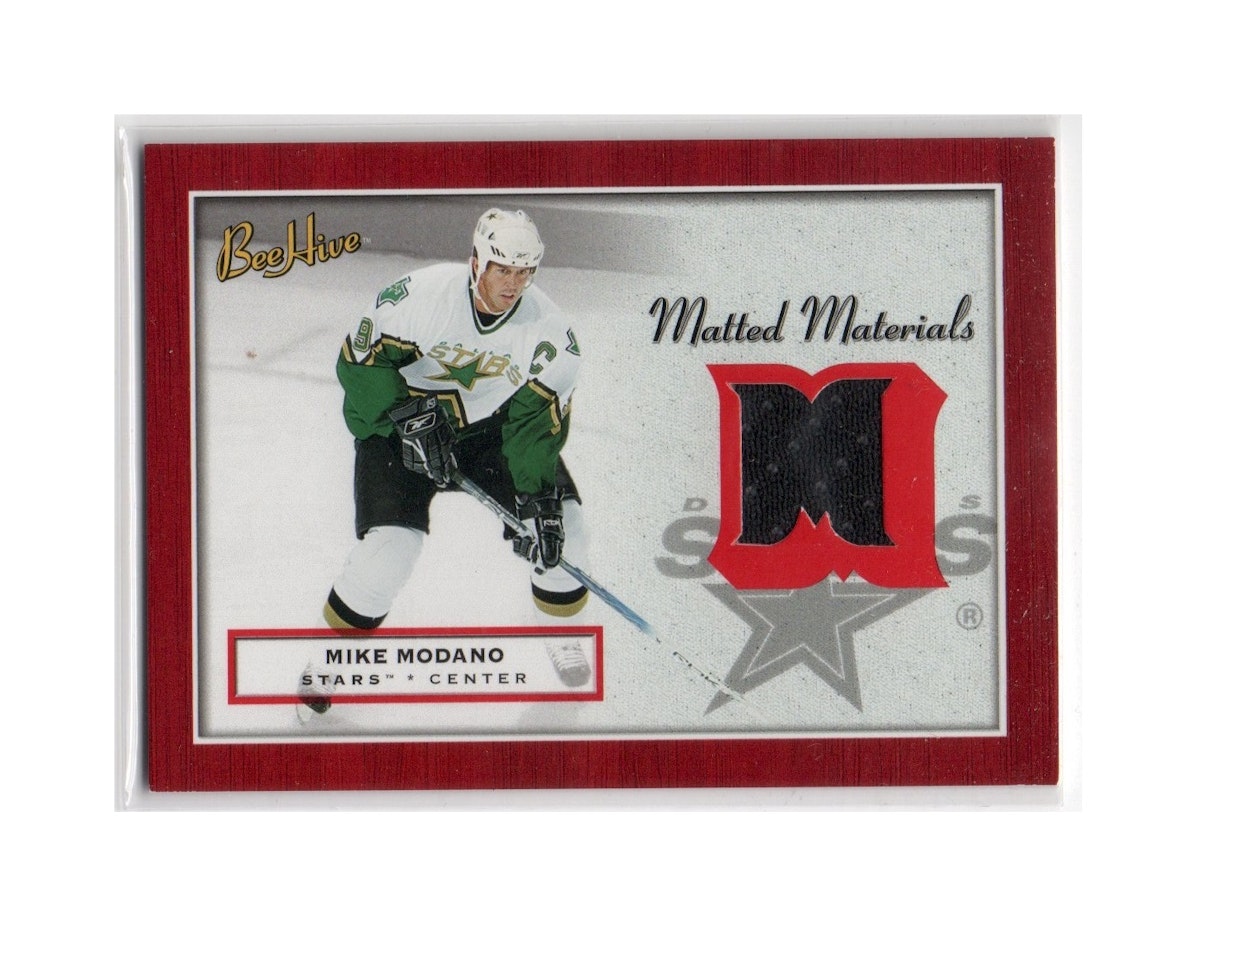 2005-06 Beehive Matted Materials #MMMM Mike Modano (50-X225-GAMEUSED-NHLSTARS)